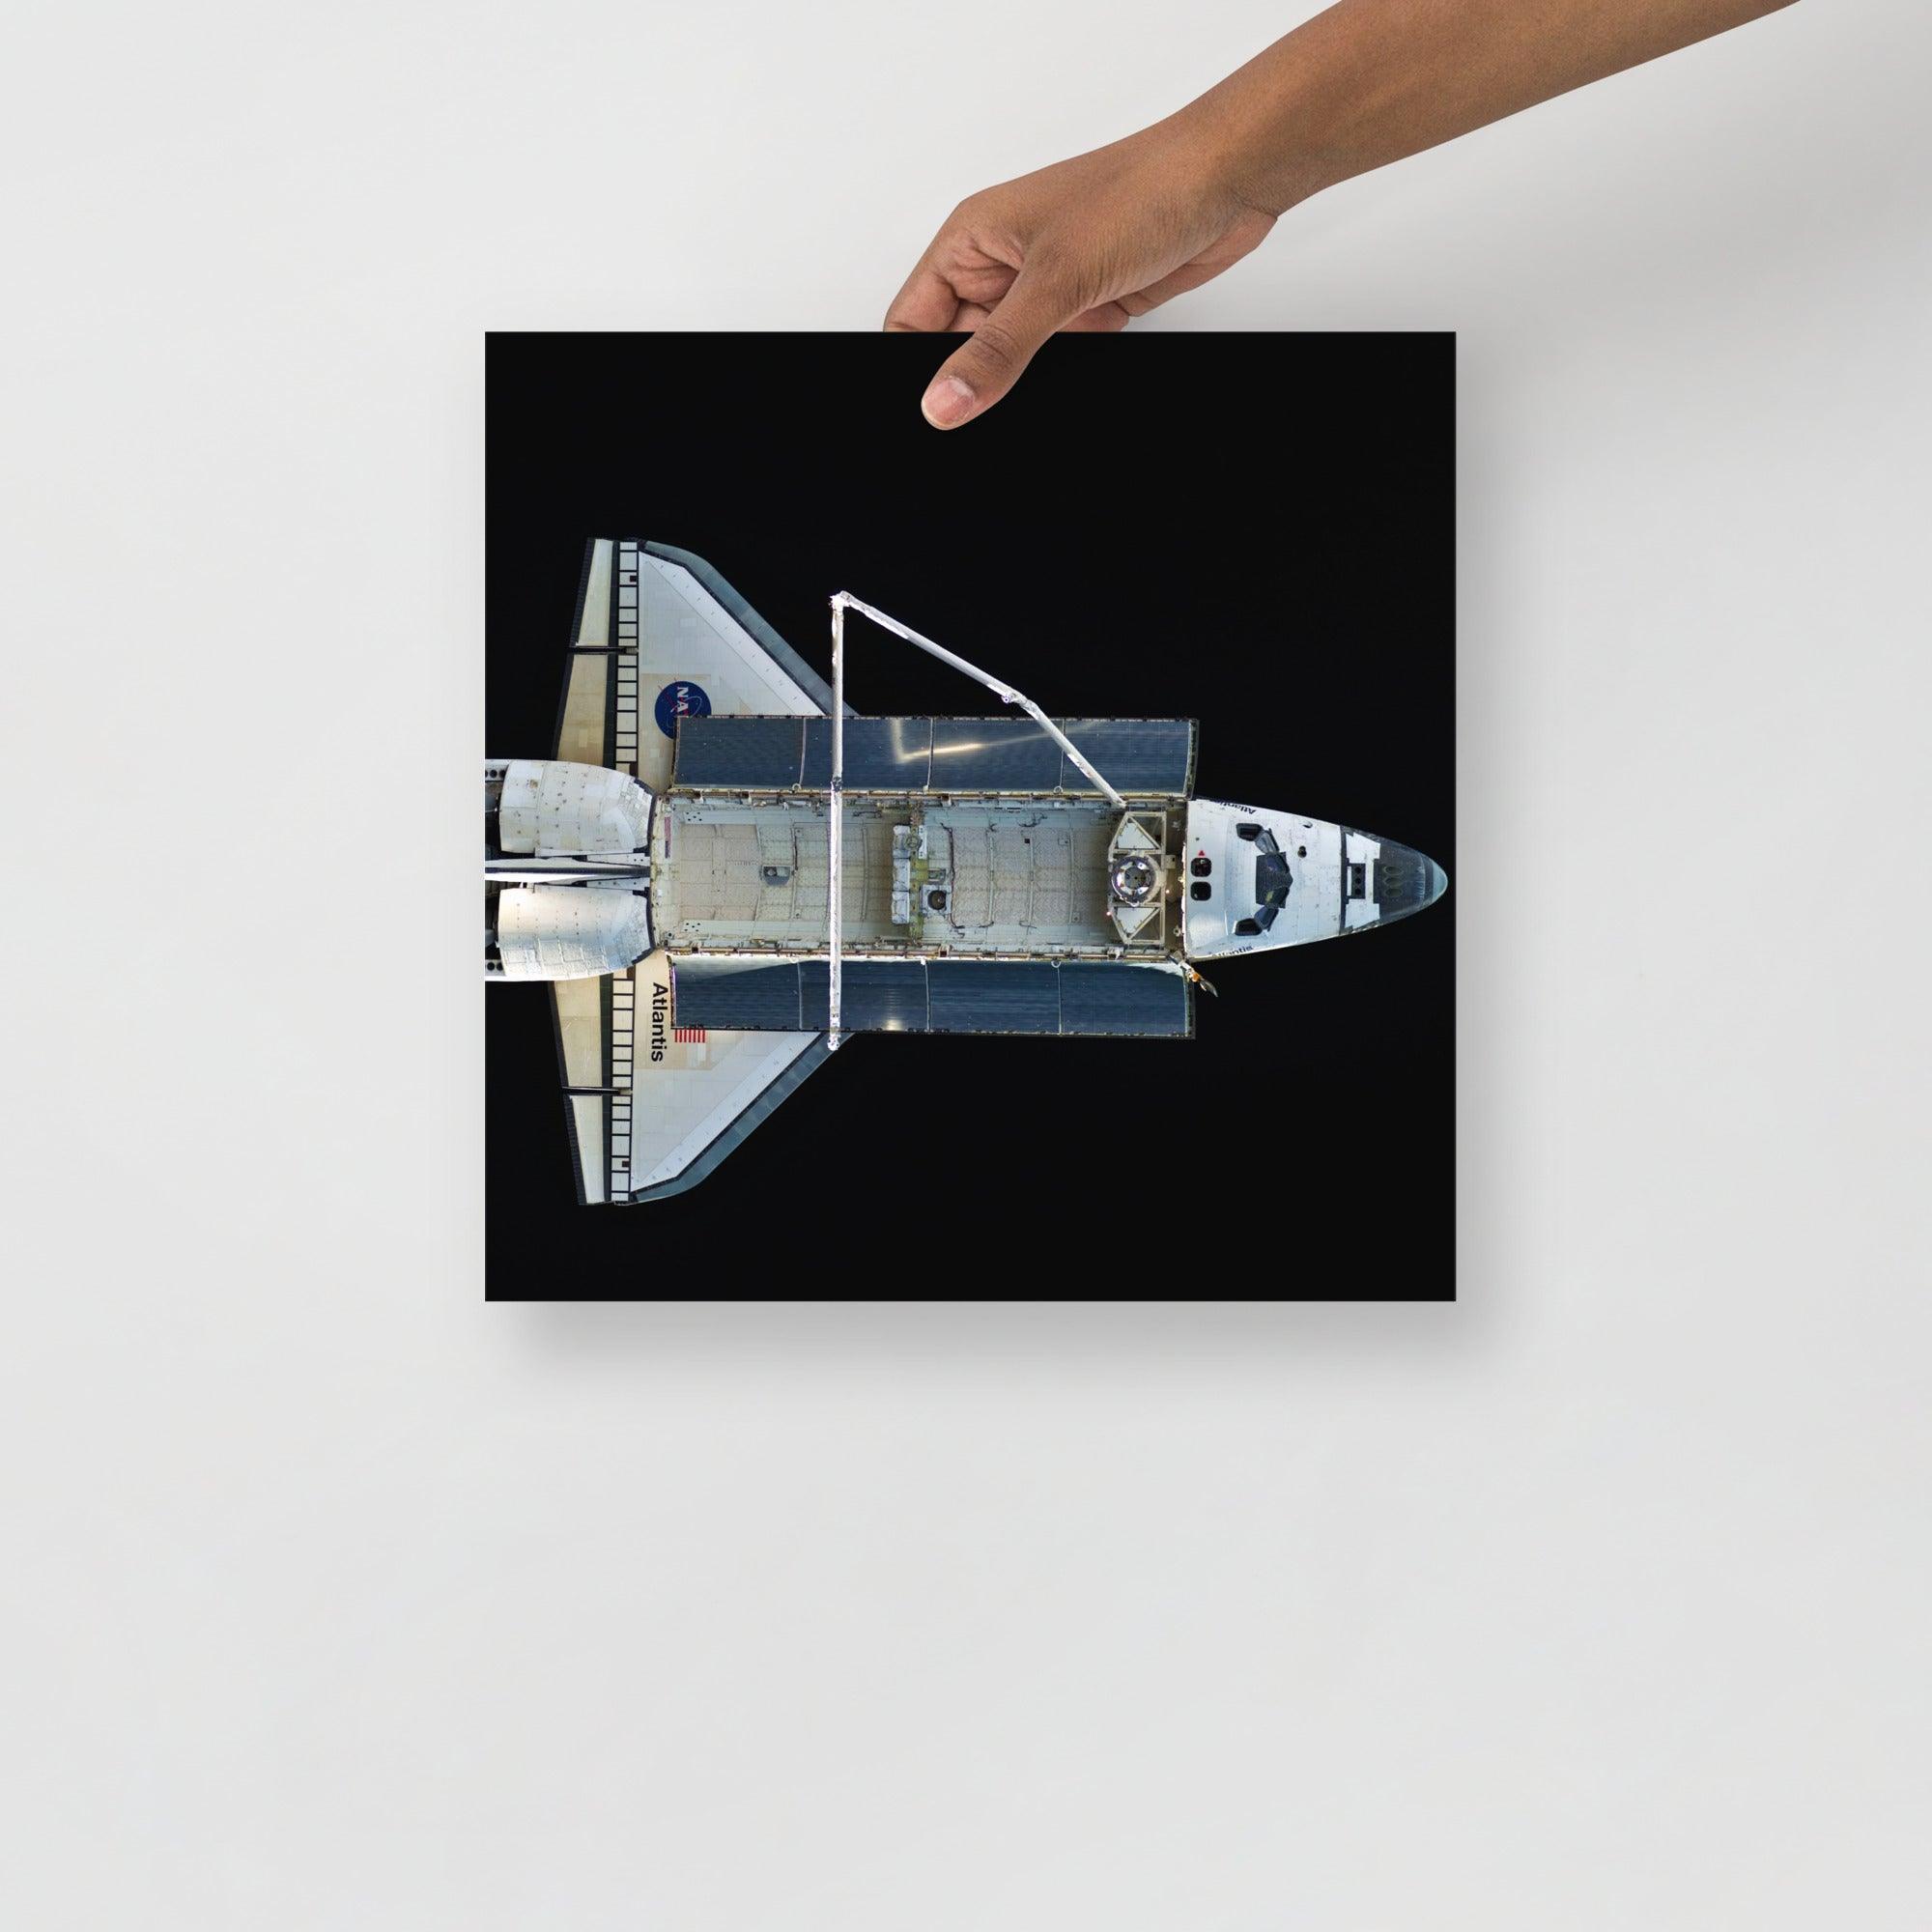 A Space Shuttle Atlantis poster on a plain backdrop in size 14x14”.